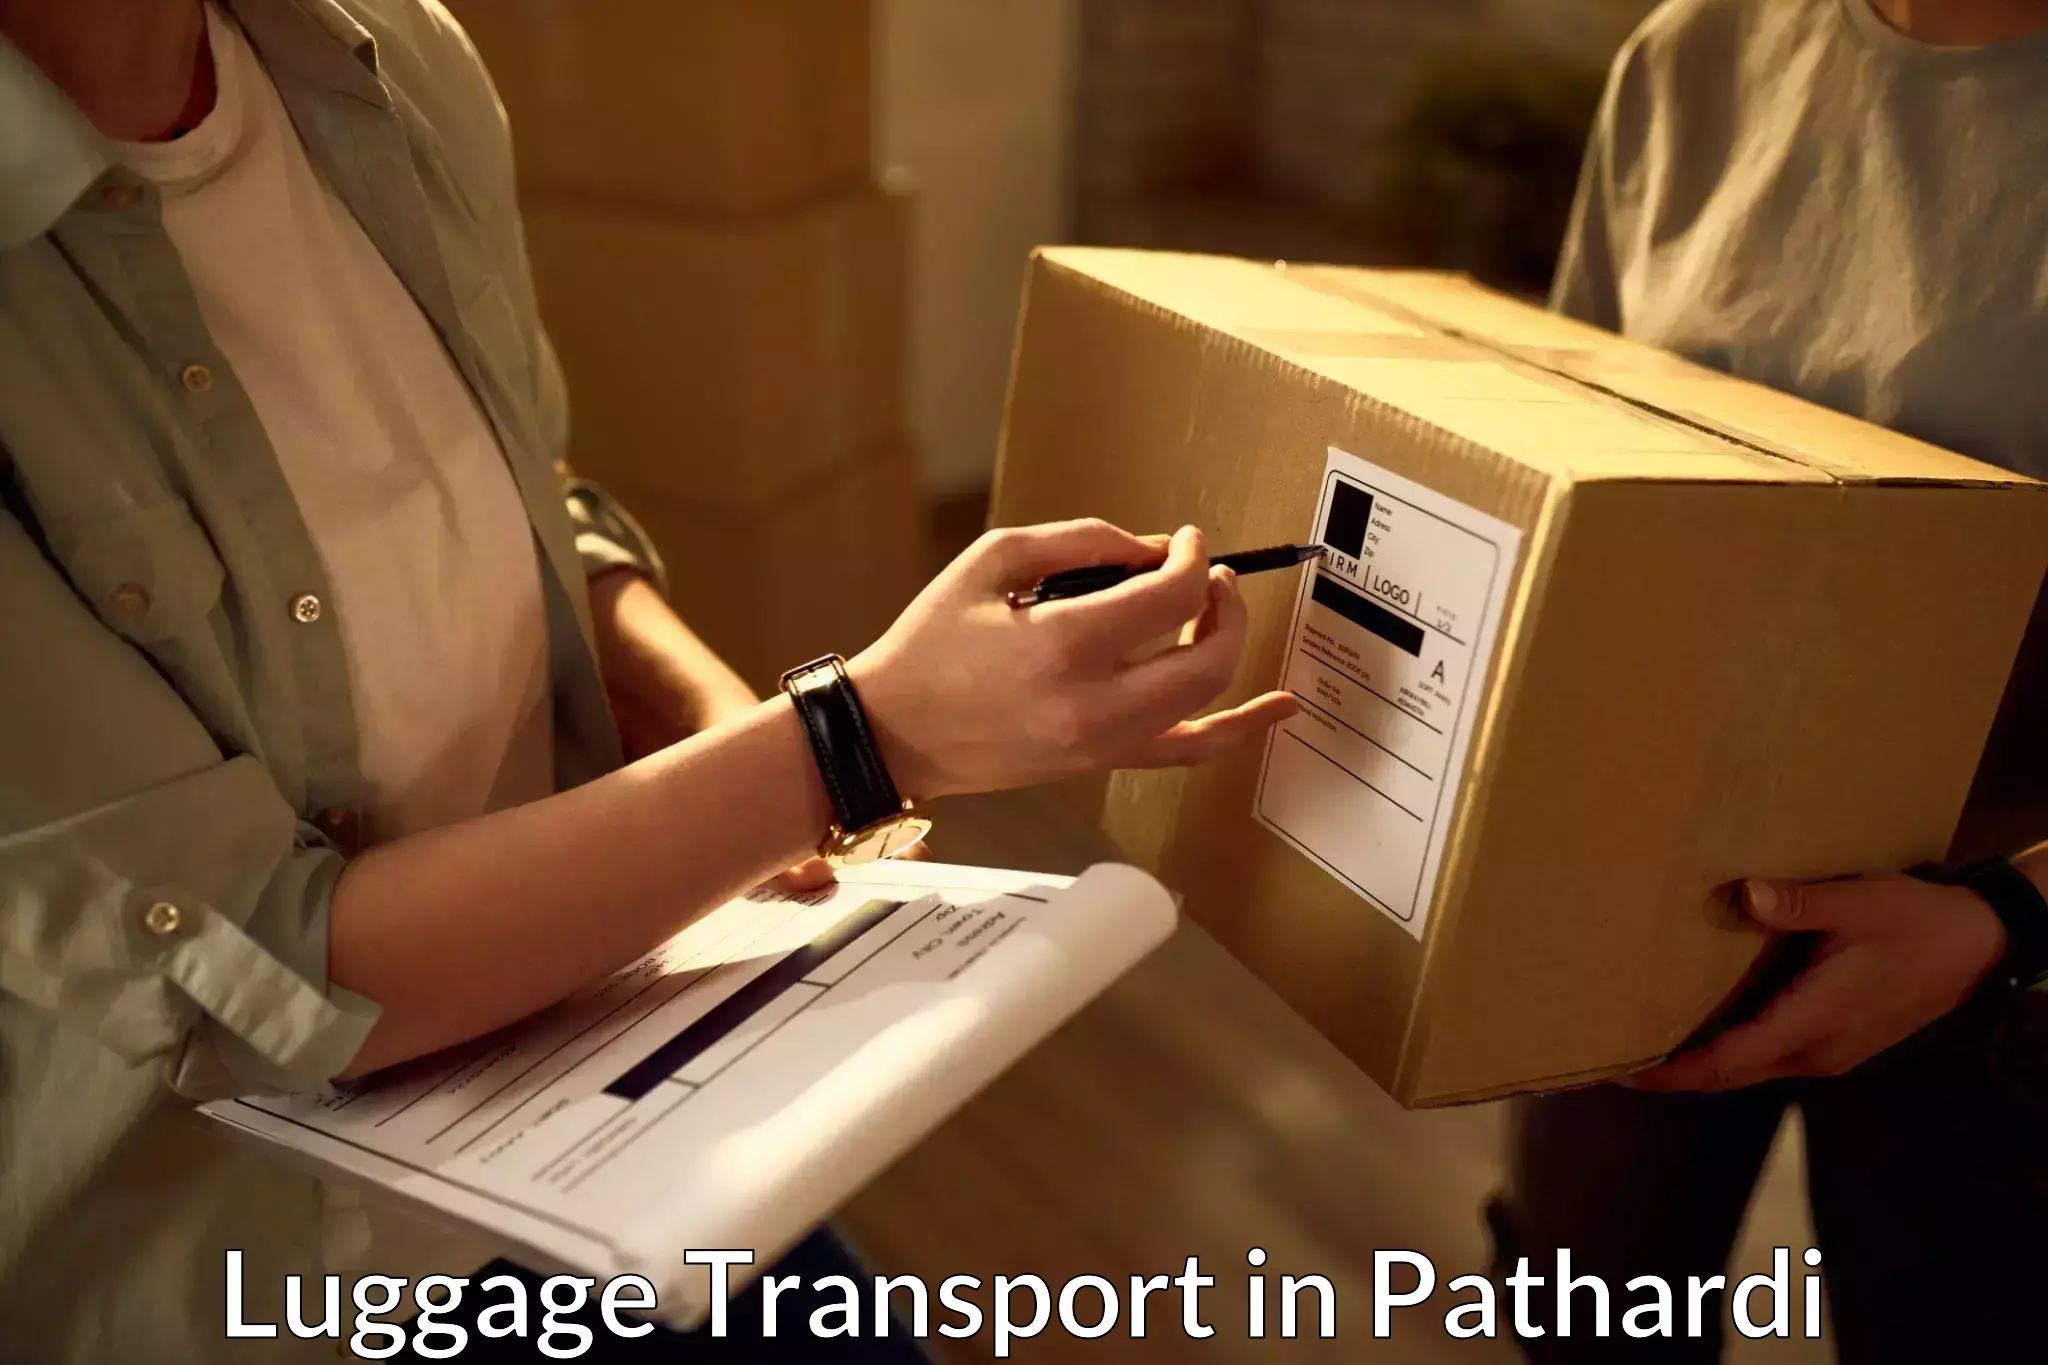 Luggage delivery optimization in Pathardi